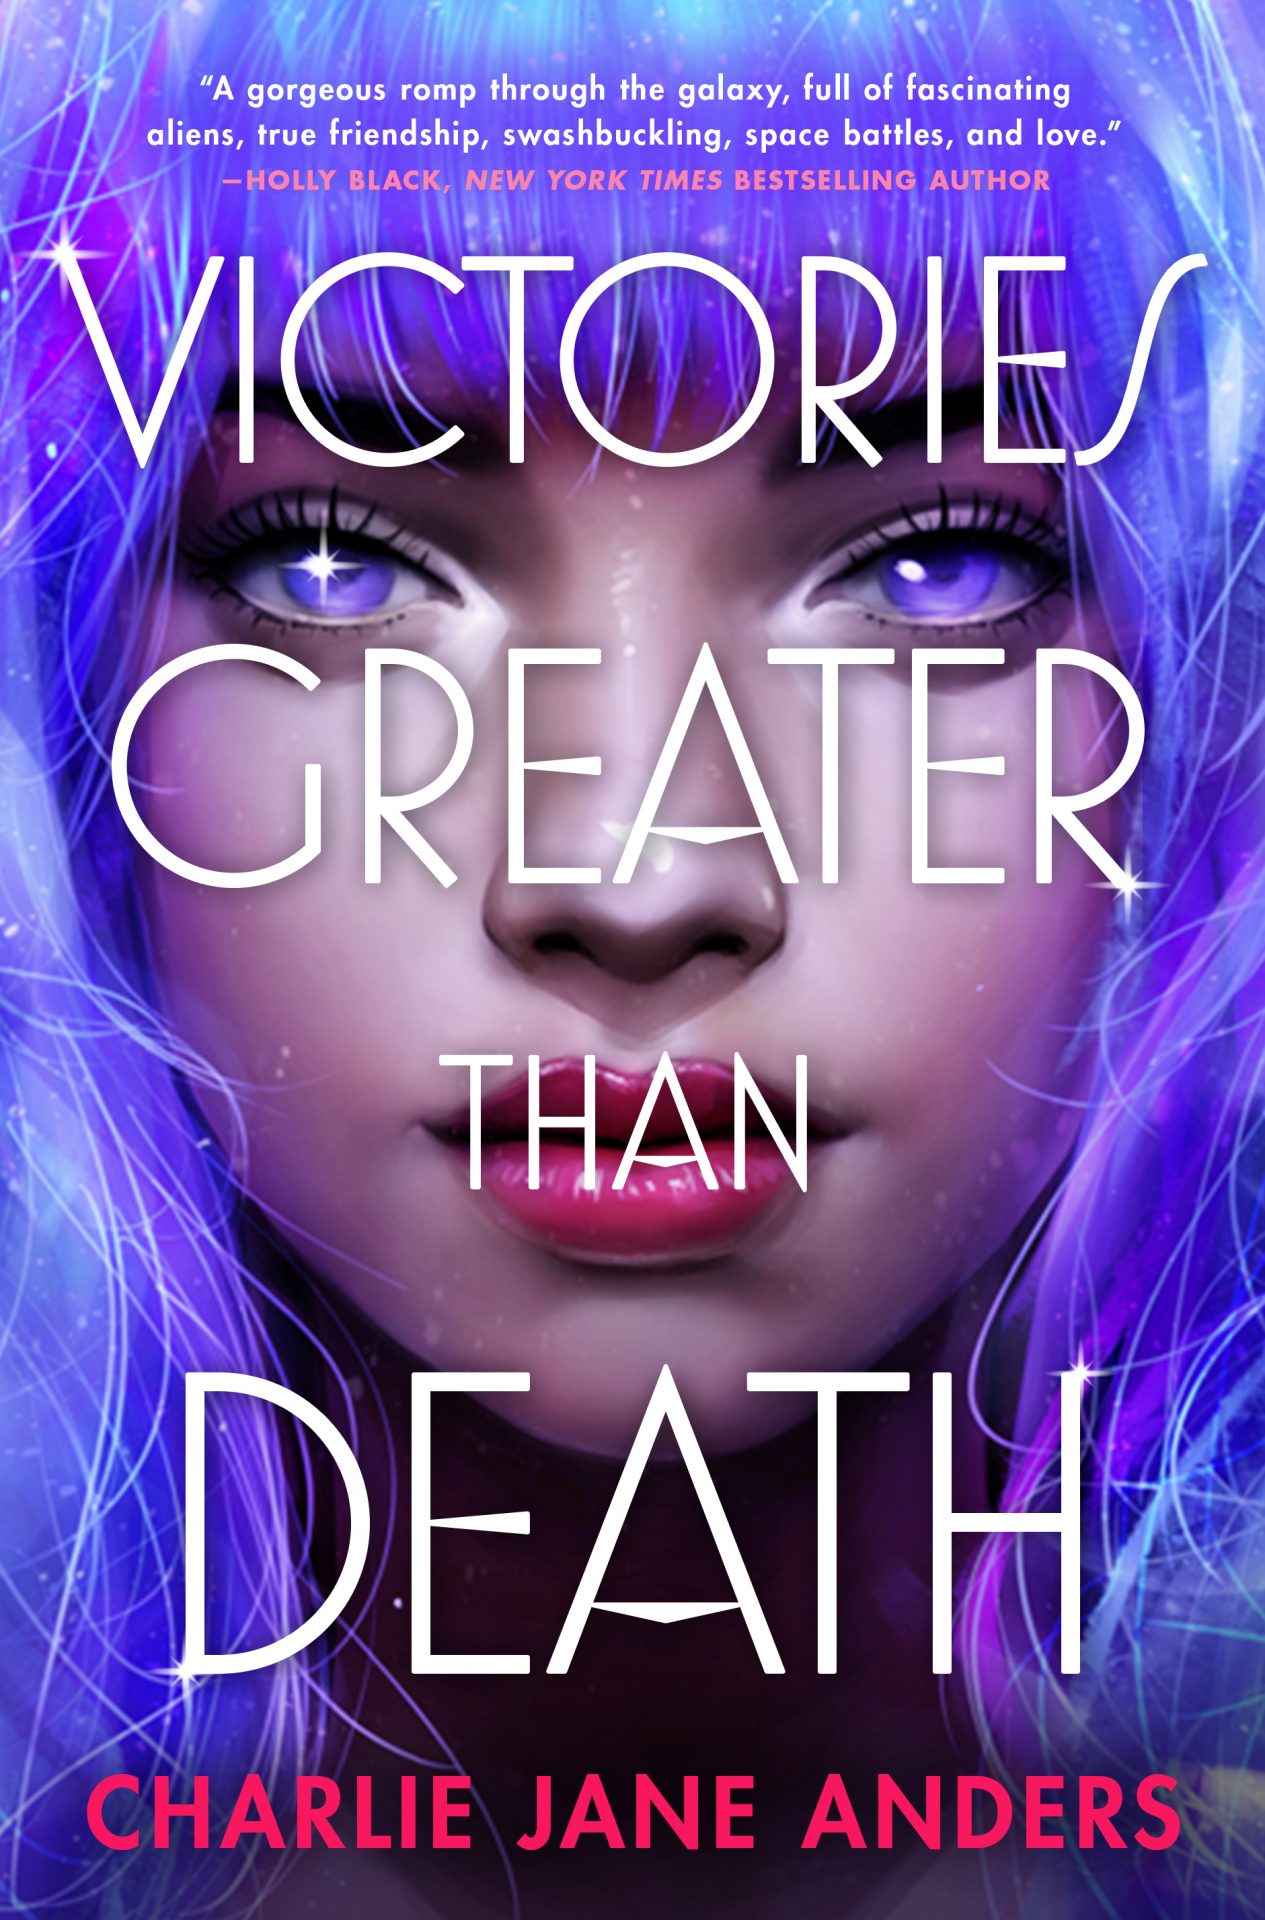 The cover of Charlie Jane Anders' new book VICTORIES GREATER THAN DEATH_1